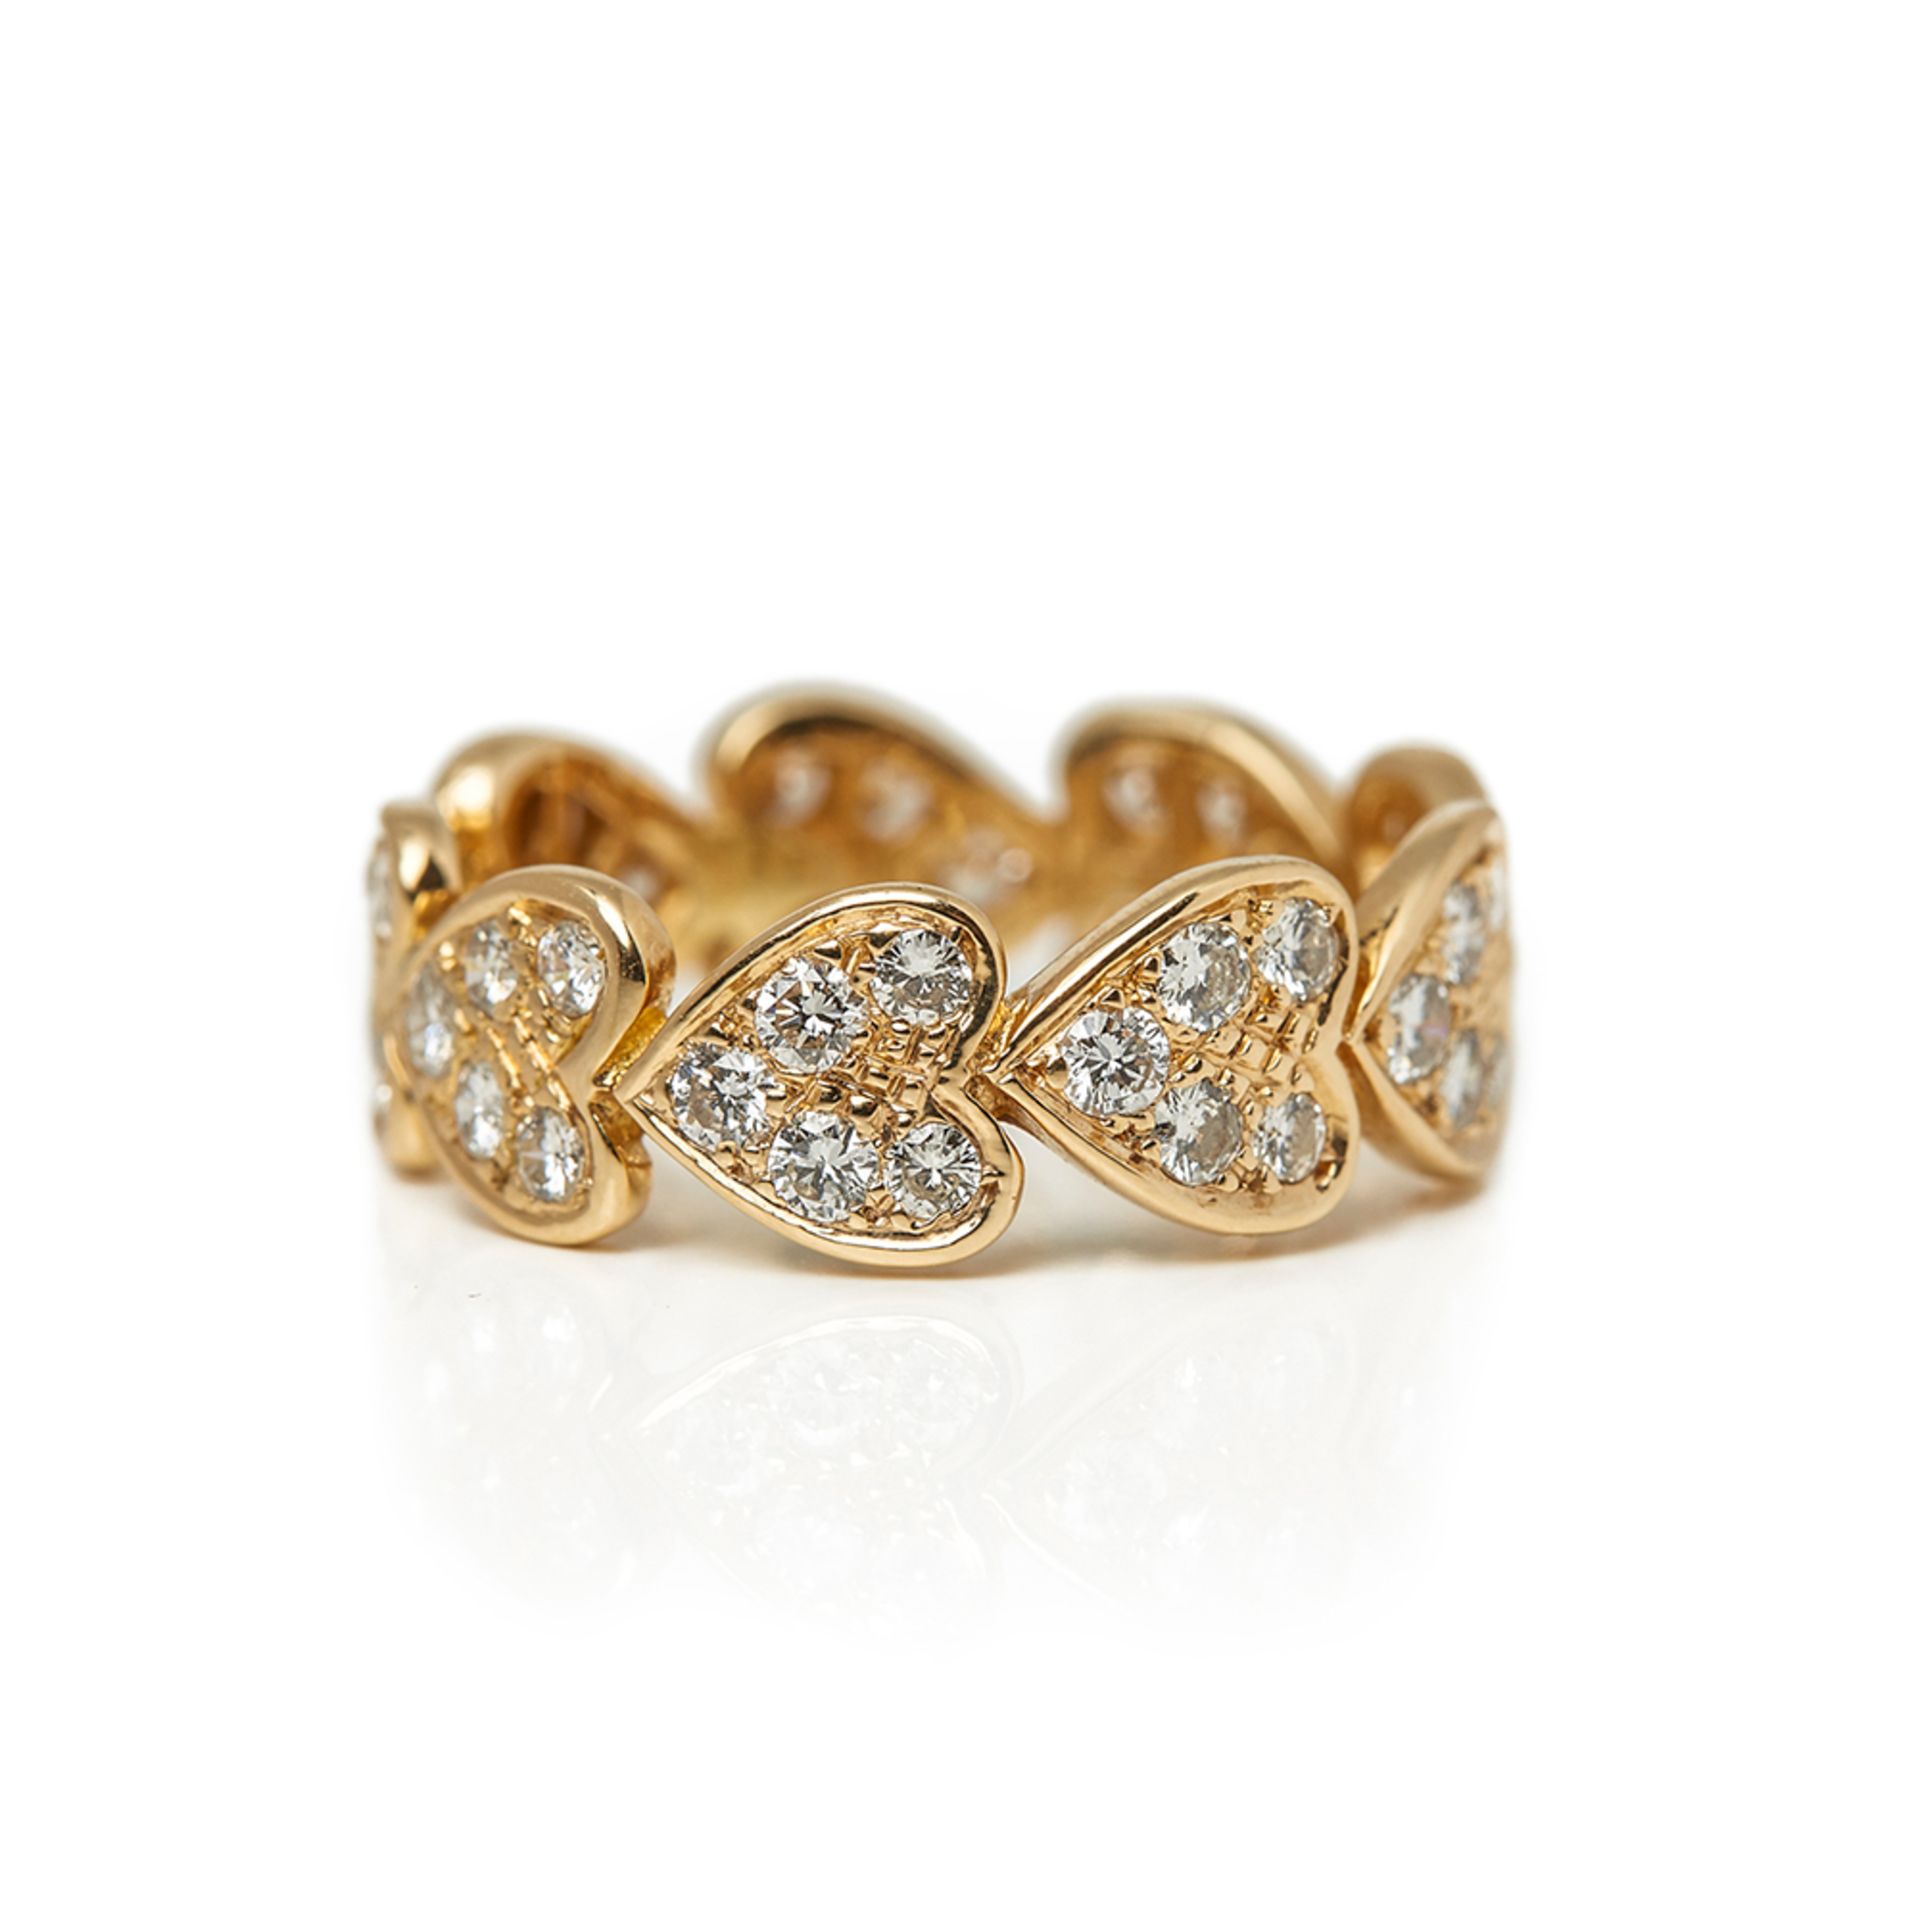 Cartier 18k Yellow Gold Diamond Heart Ring - Image 5 of 23